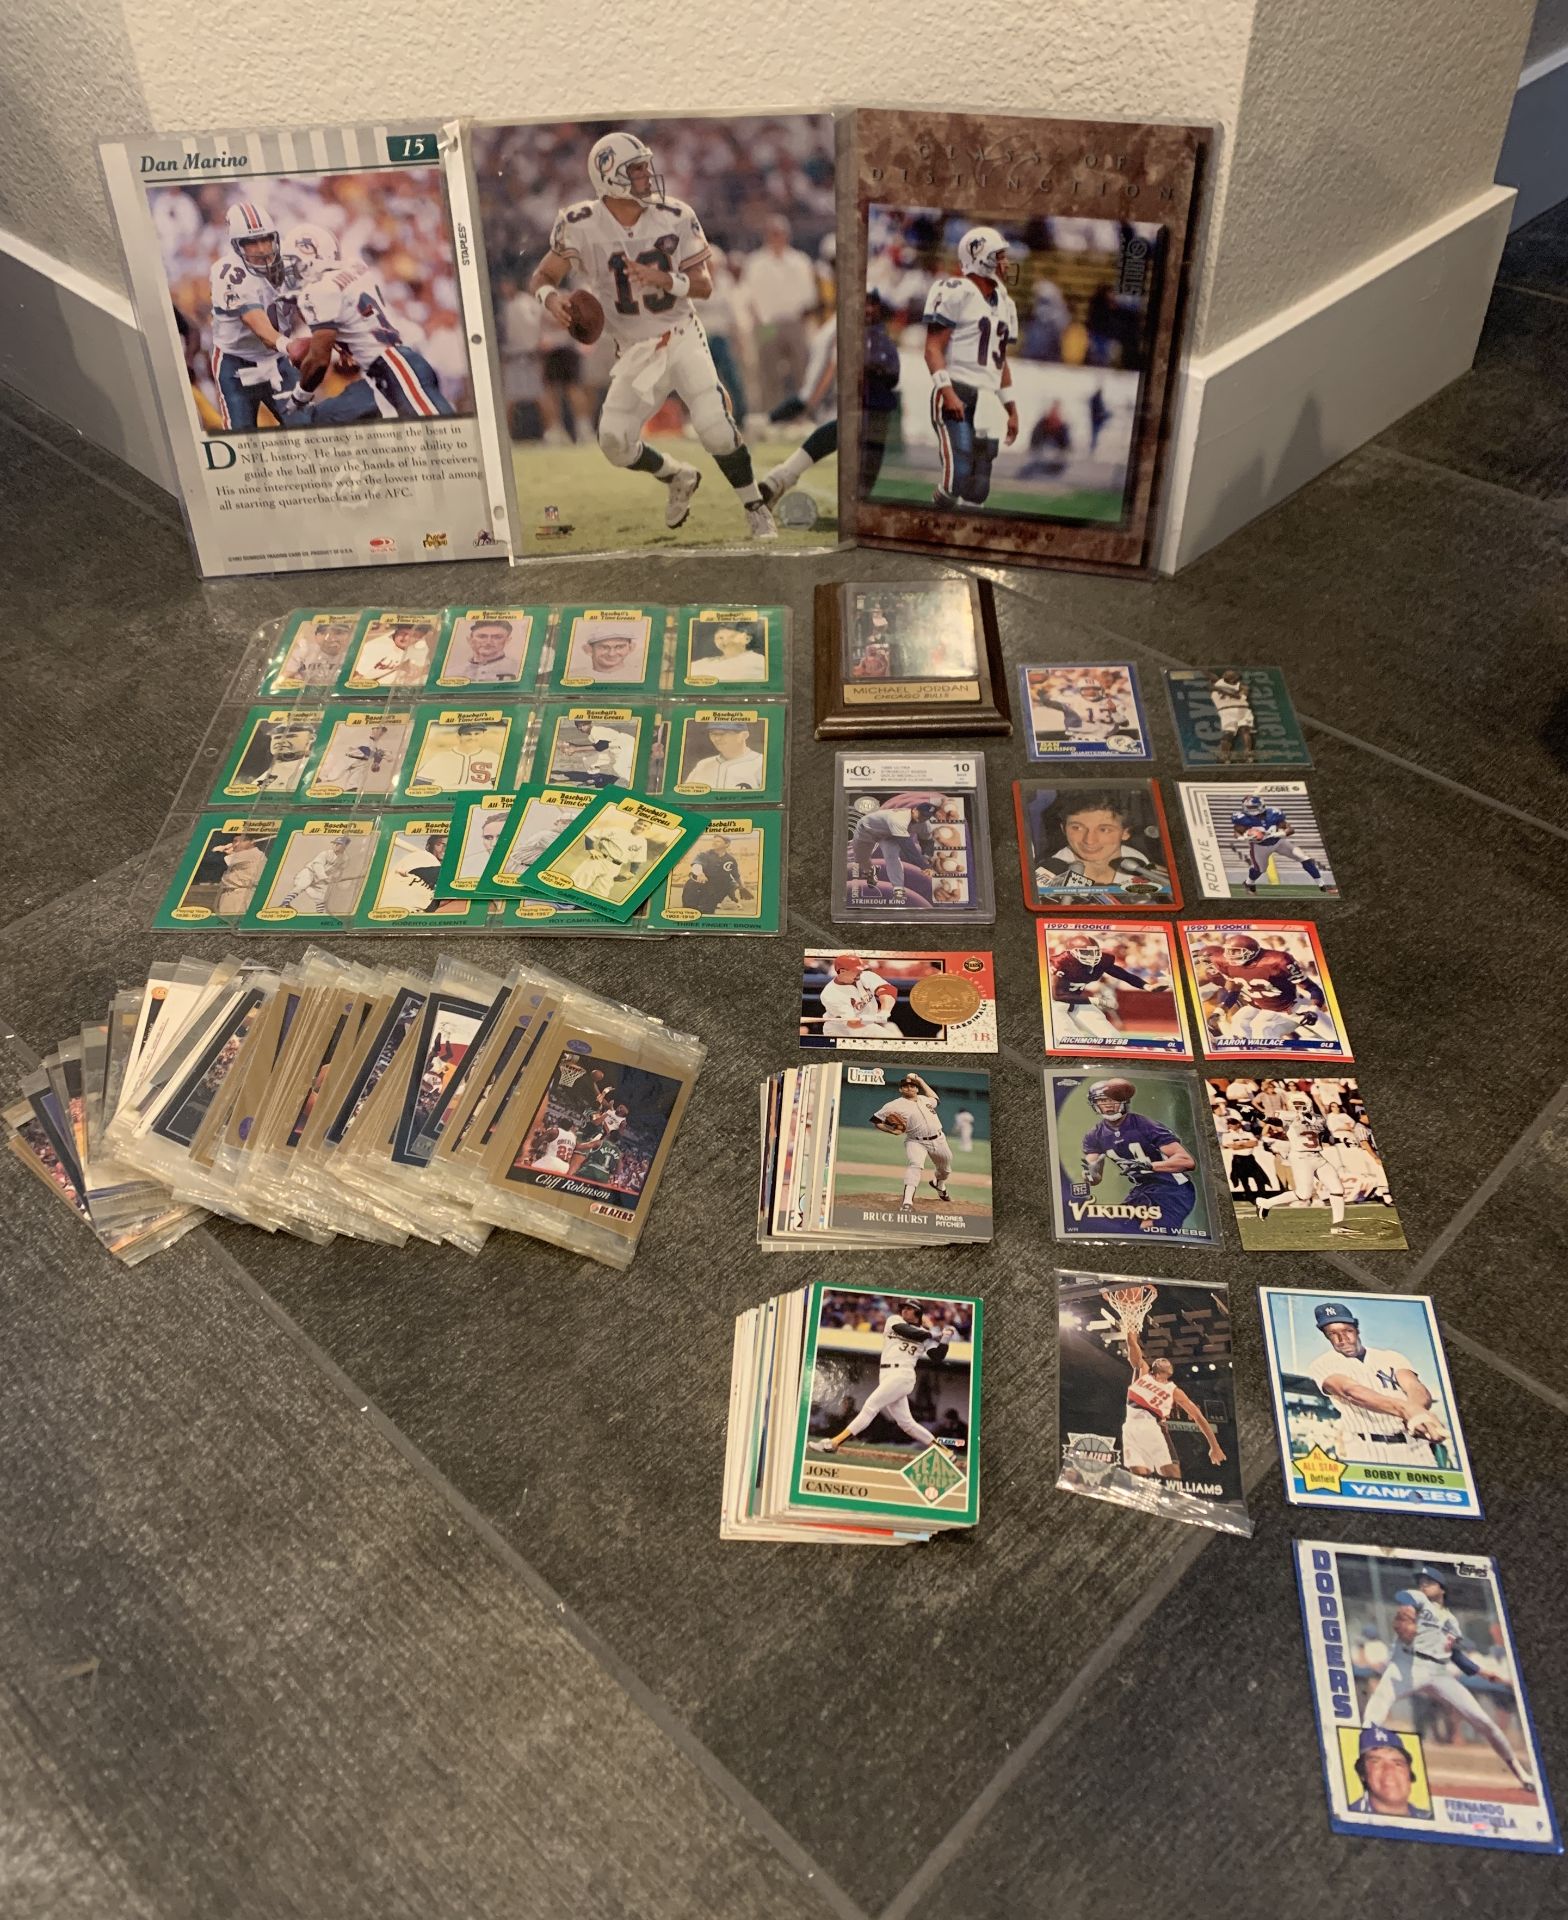 LOTS OF SOME VERY RARE COLLECTIBLE ITEMS AND CARDS DAN MARINO, WAYNE GRETZKY + MORE